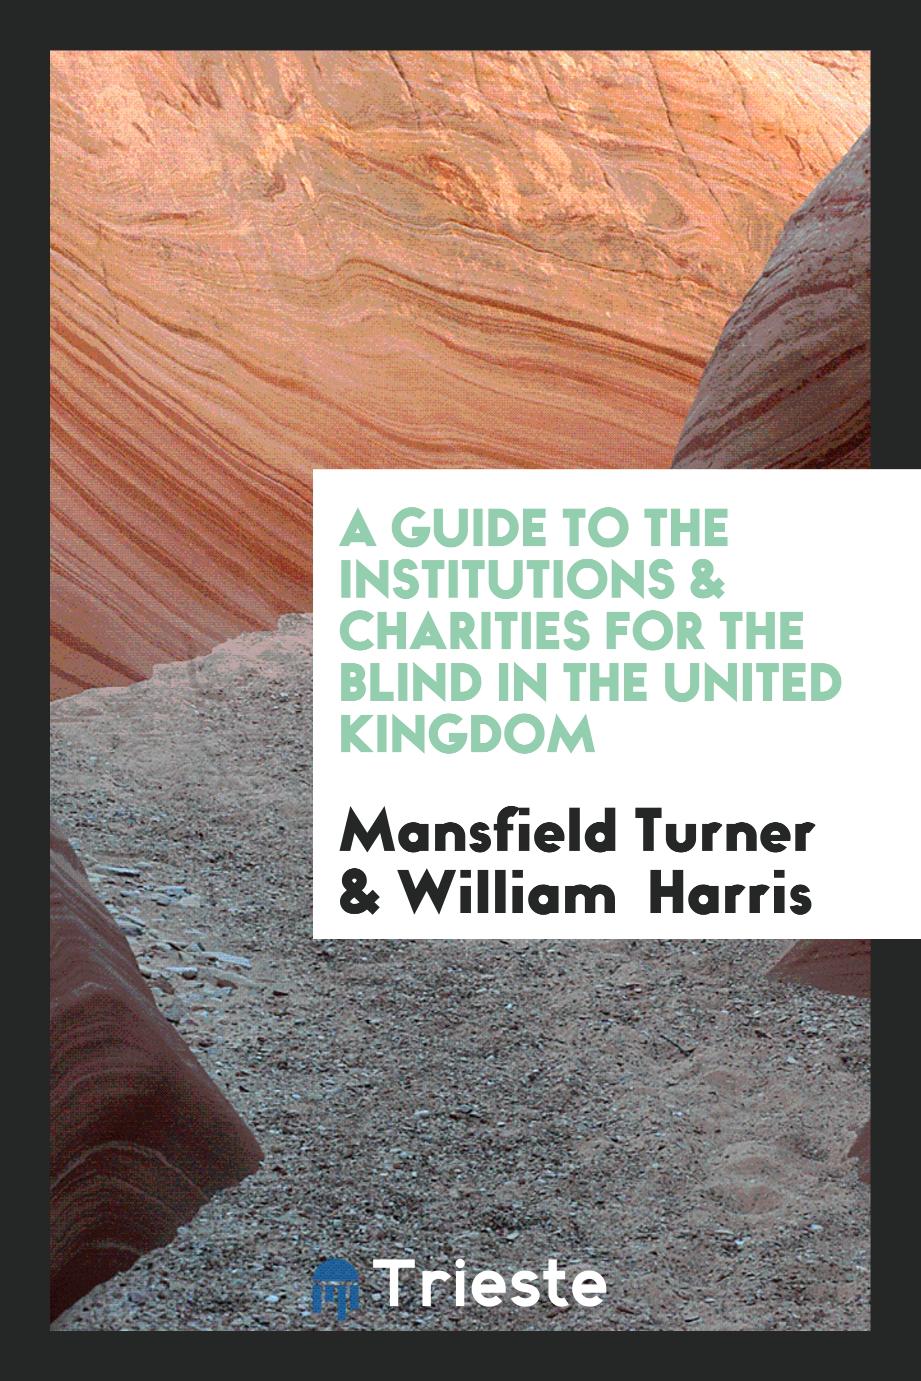 A Guide to the Institutions & Charities for the Blind in the United Kingdom